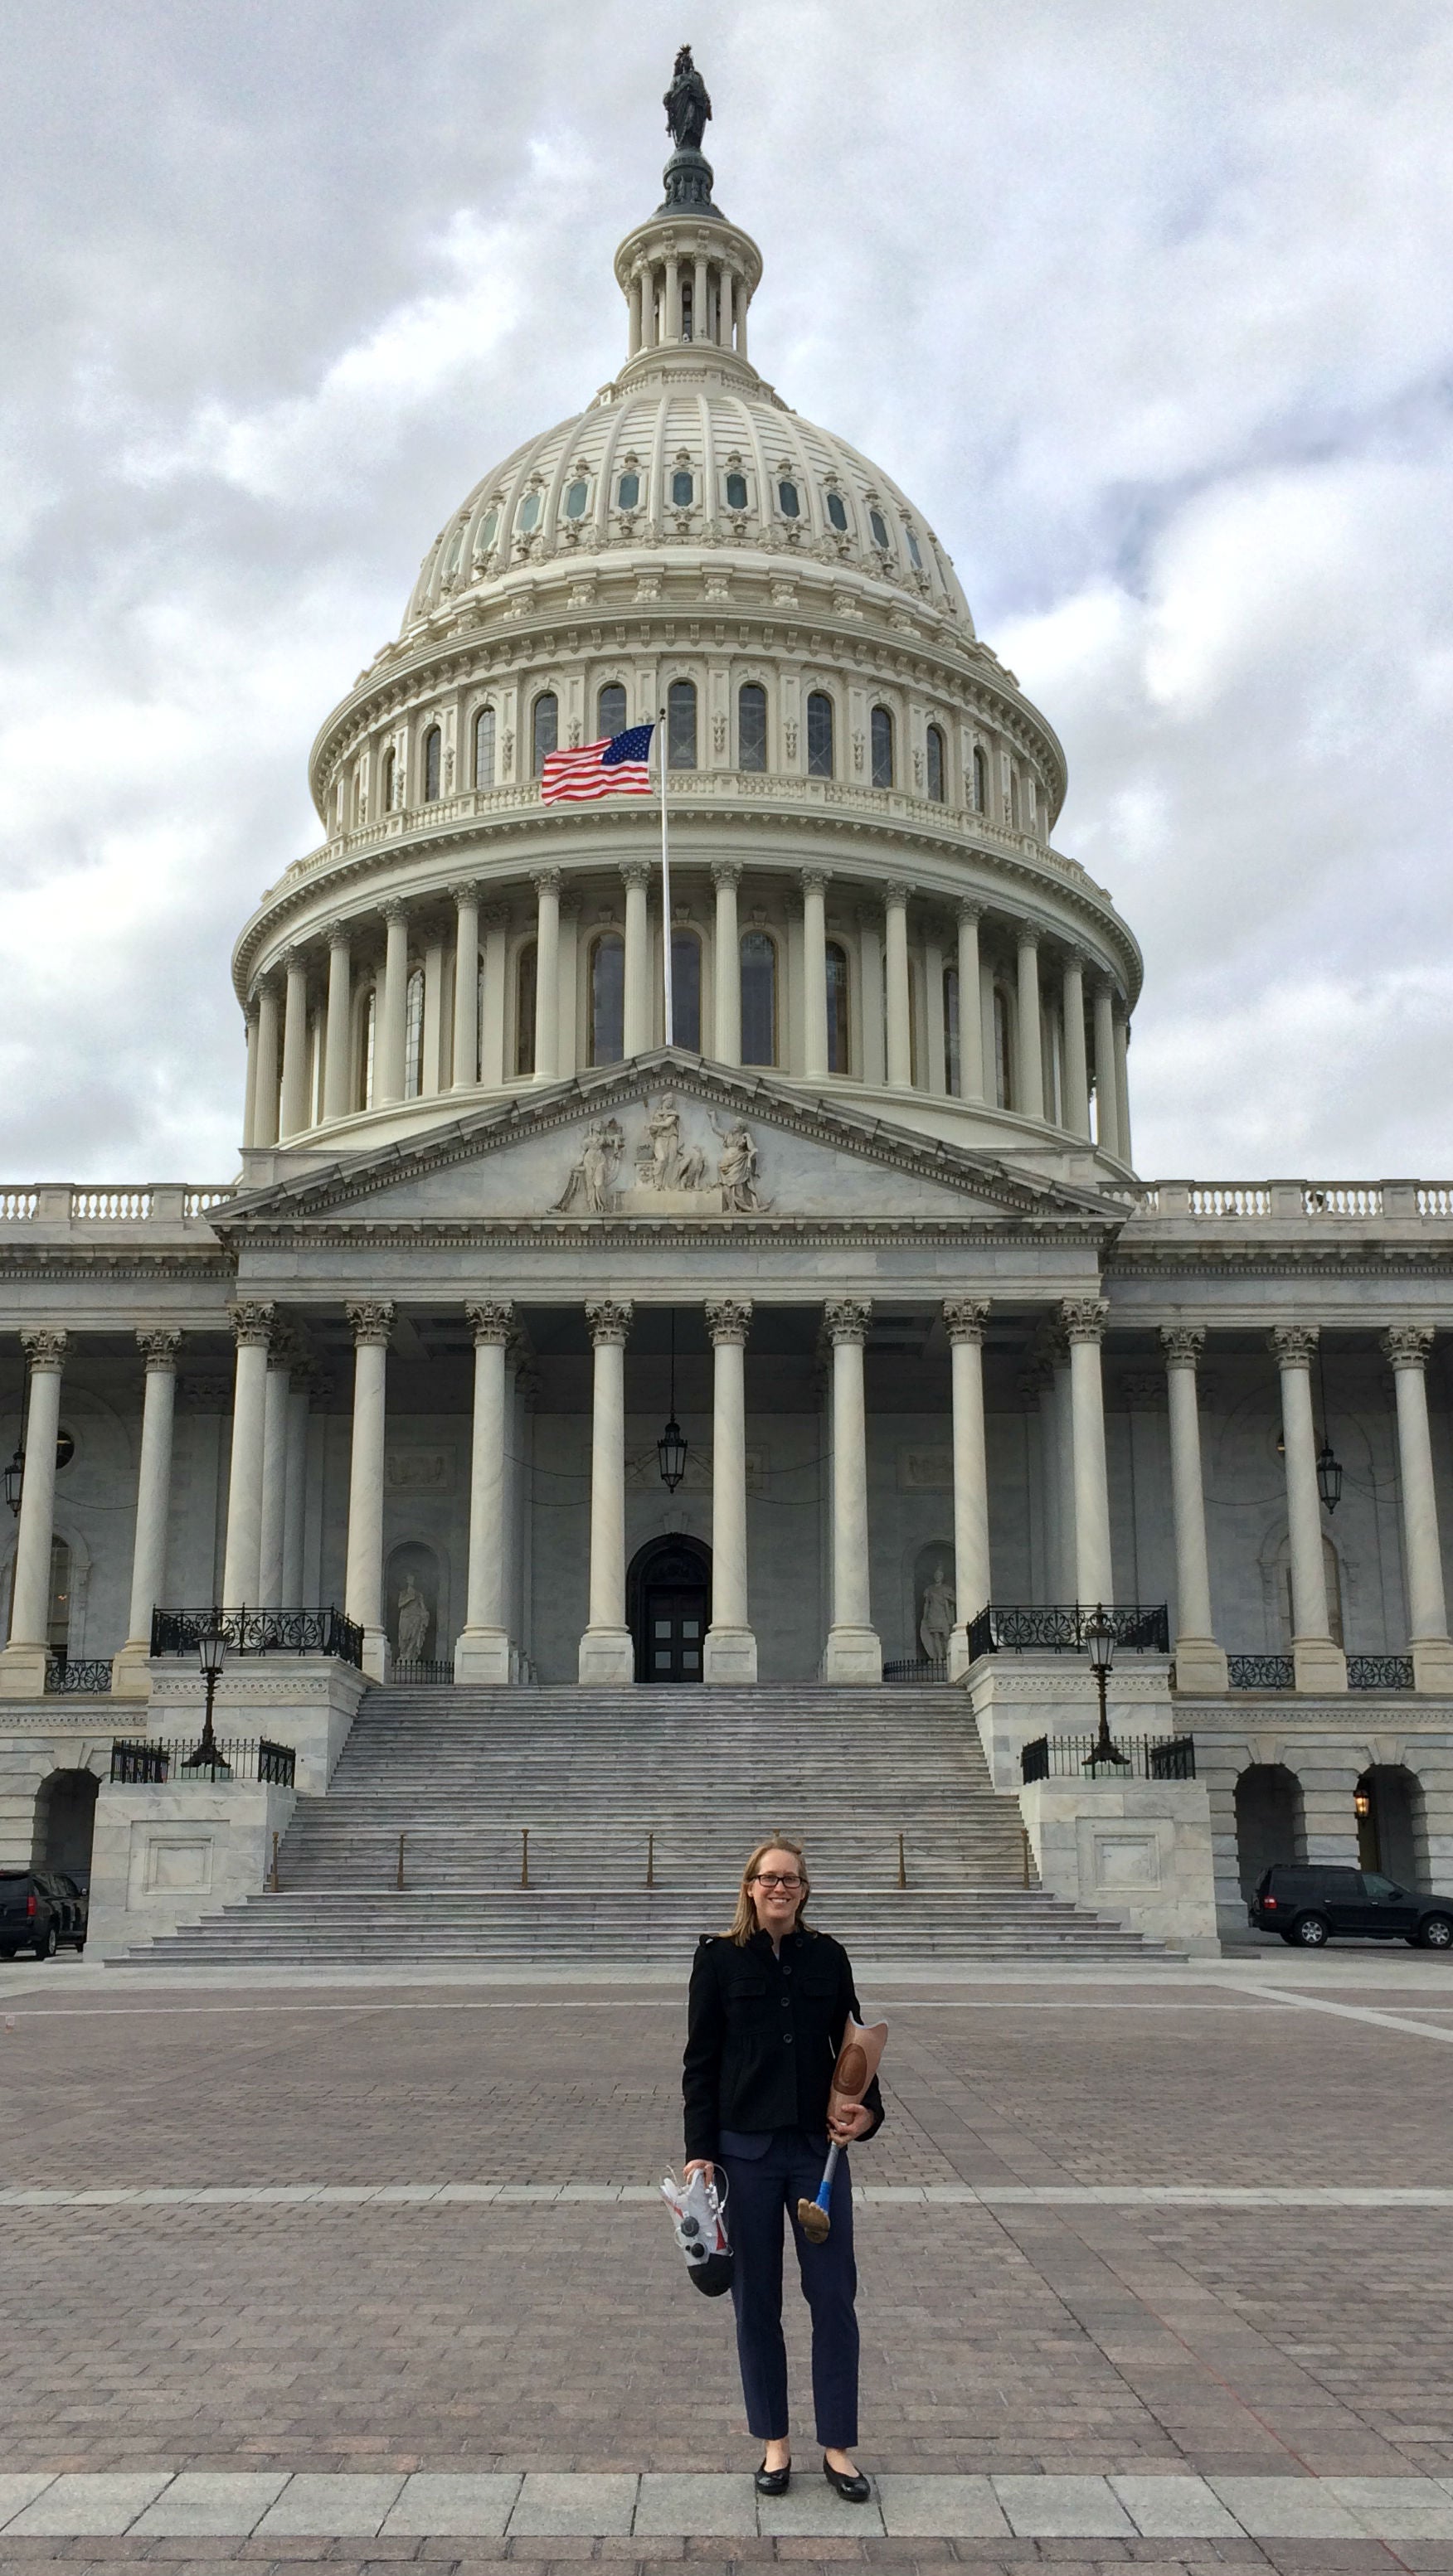 Madalyn Kern, PhD on the Hill for ReForm, Inc.